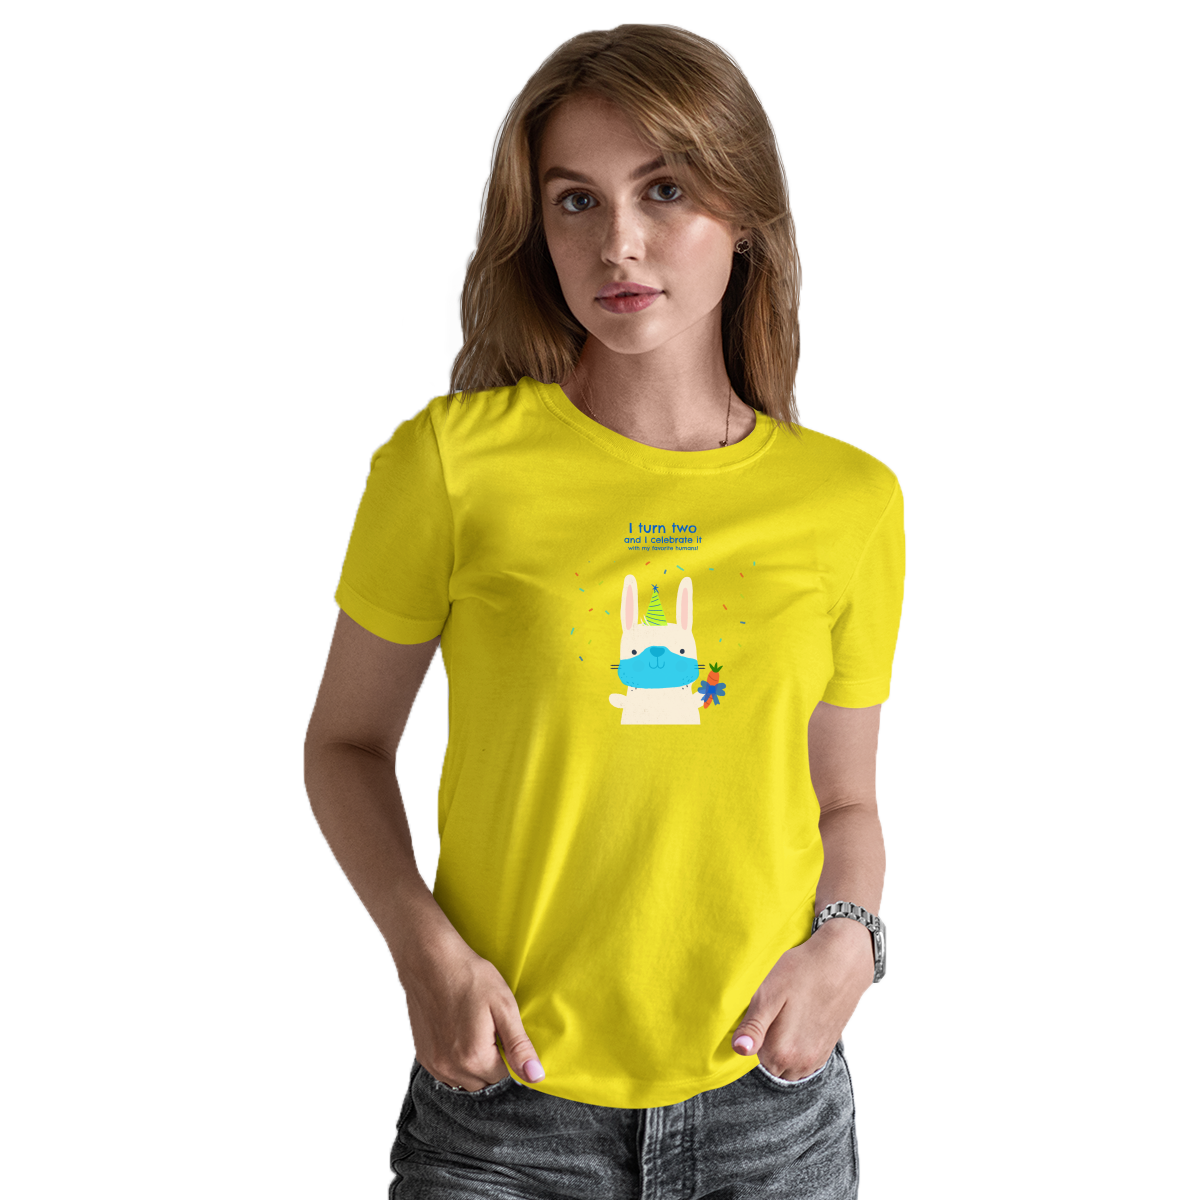 I turn two and I celebrate it with my favorite humans  Women's T-shirt | Yellow